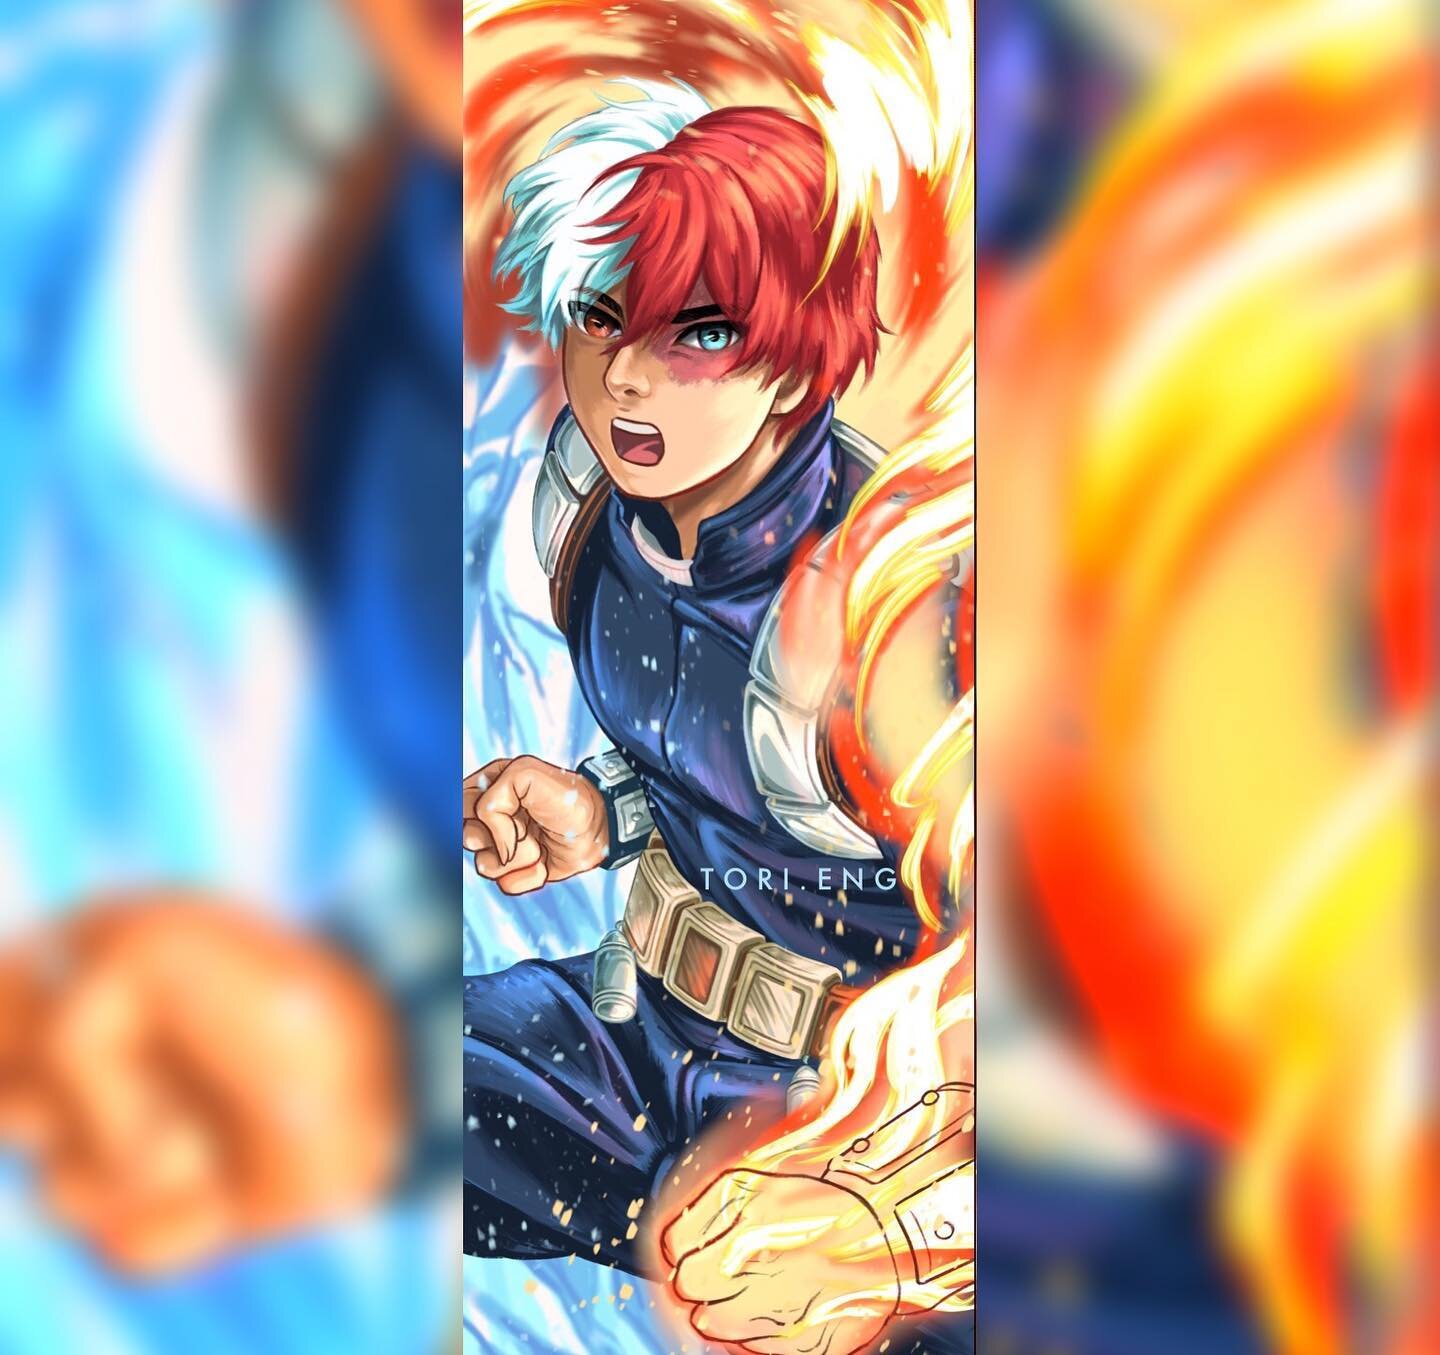 Swipe to see the progress from sketch ⏩ rough color ⏩ final! This is 2/3 in a series of anime bookmarks I&rsquo;m making (ty @allyshortstuff ) ^^ Next up is Zuko!
.
.
.
.
#todoroki #todorokishouto #mha #myheroacademia #myheroacademiafanart #bokunoher